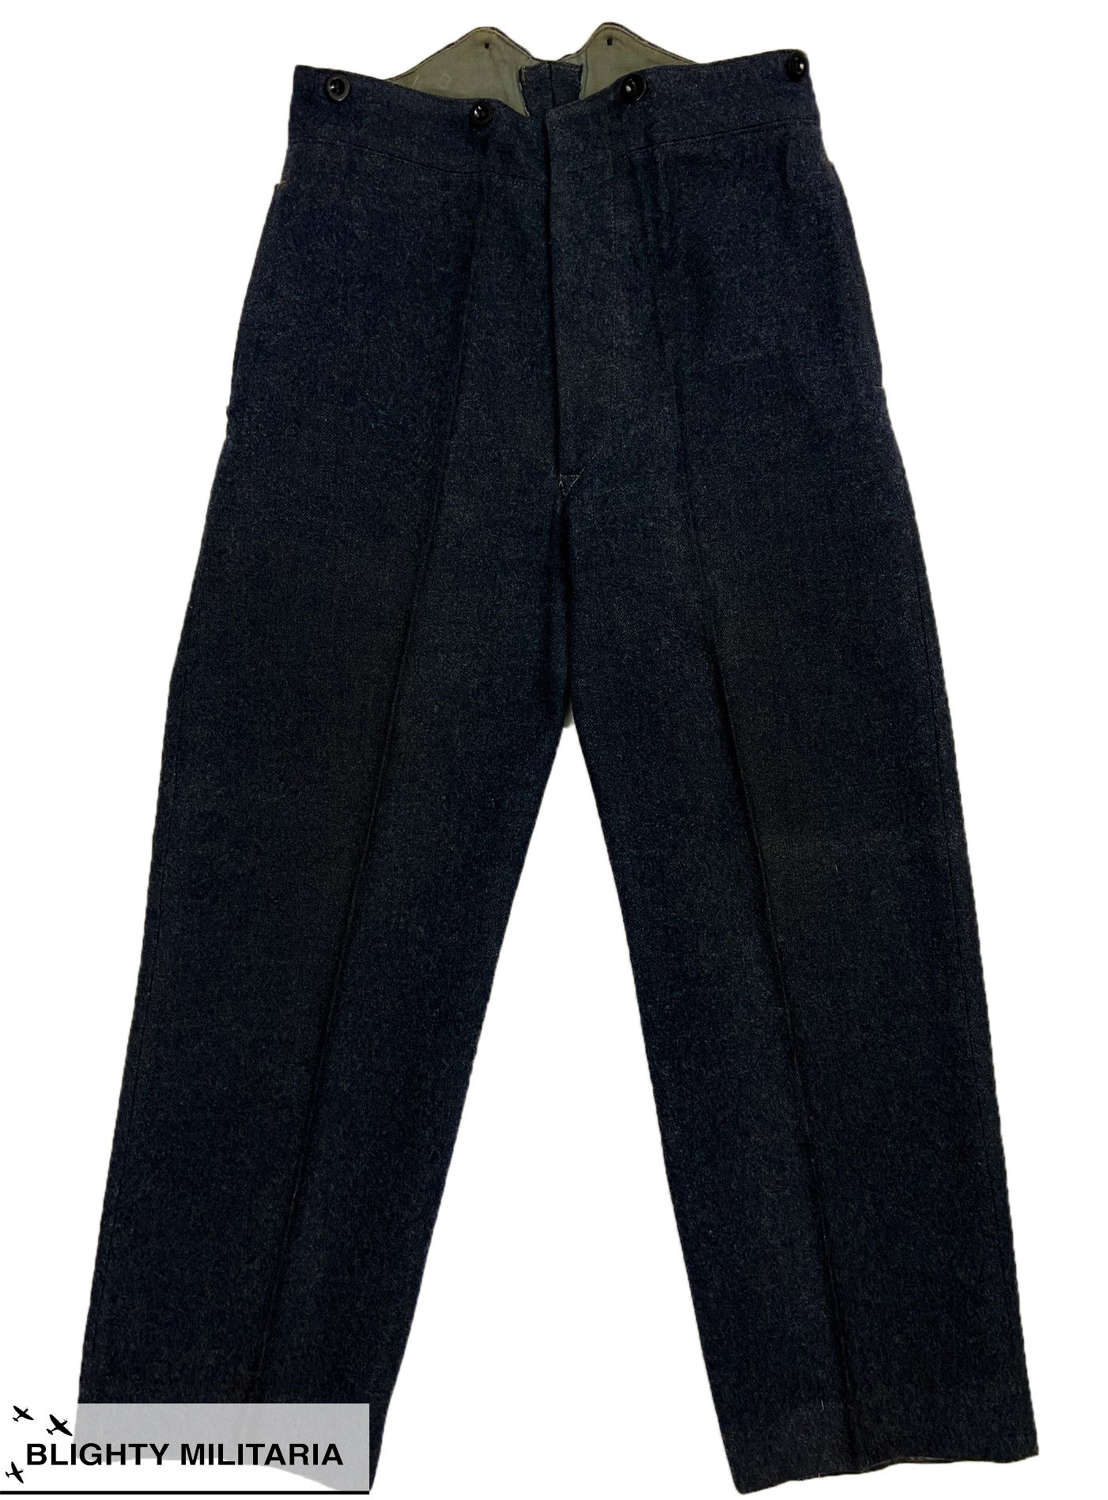 Original 1950 Dated RAF Ordinary Airman's Trousers - Size 5